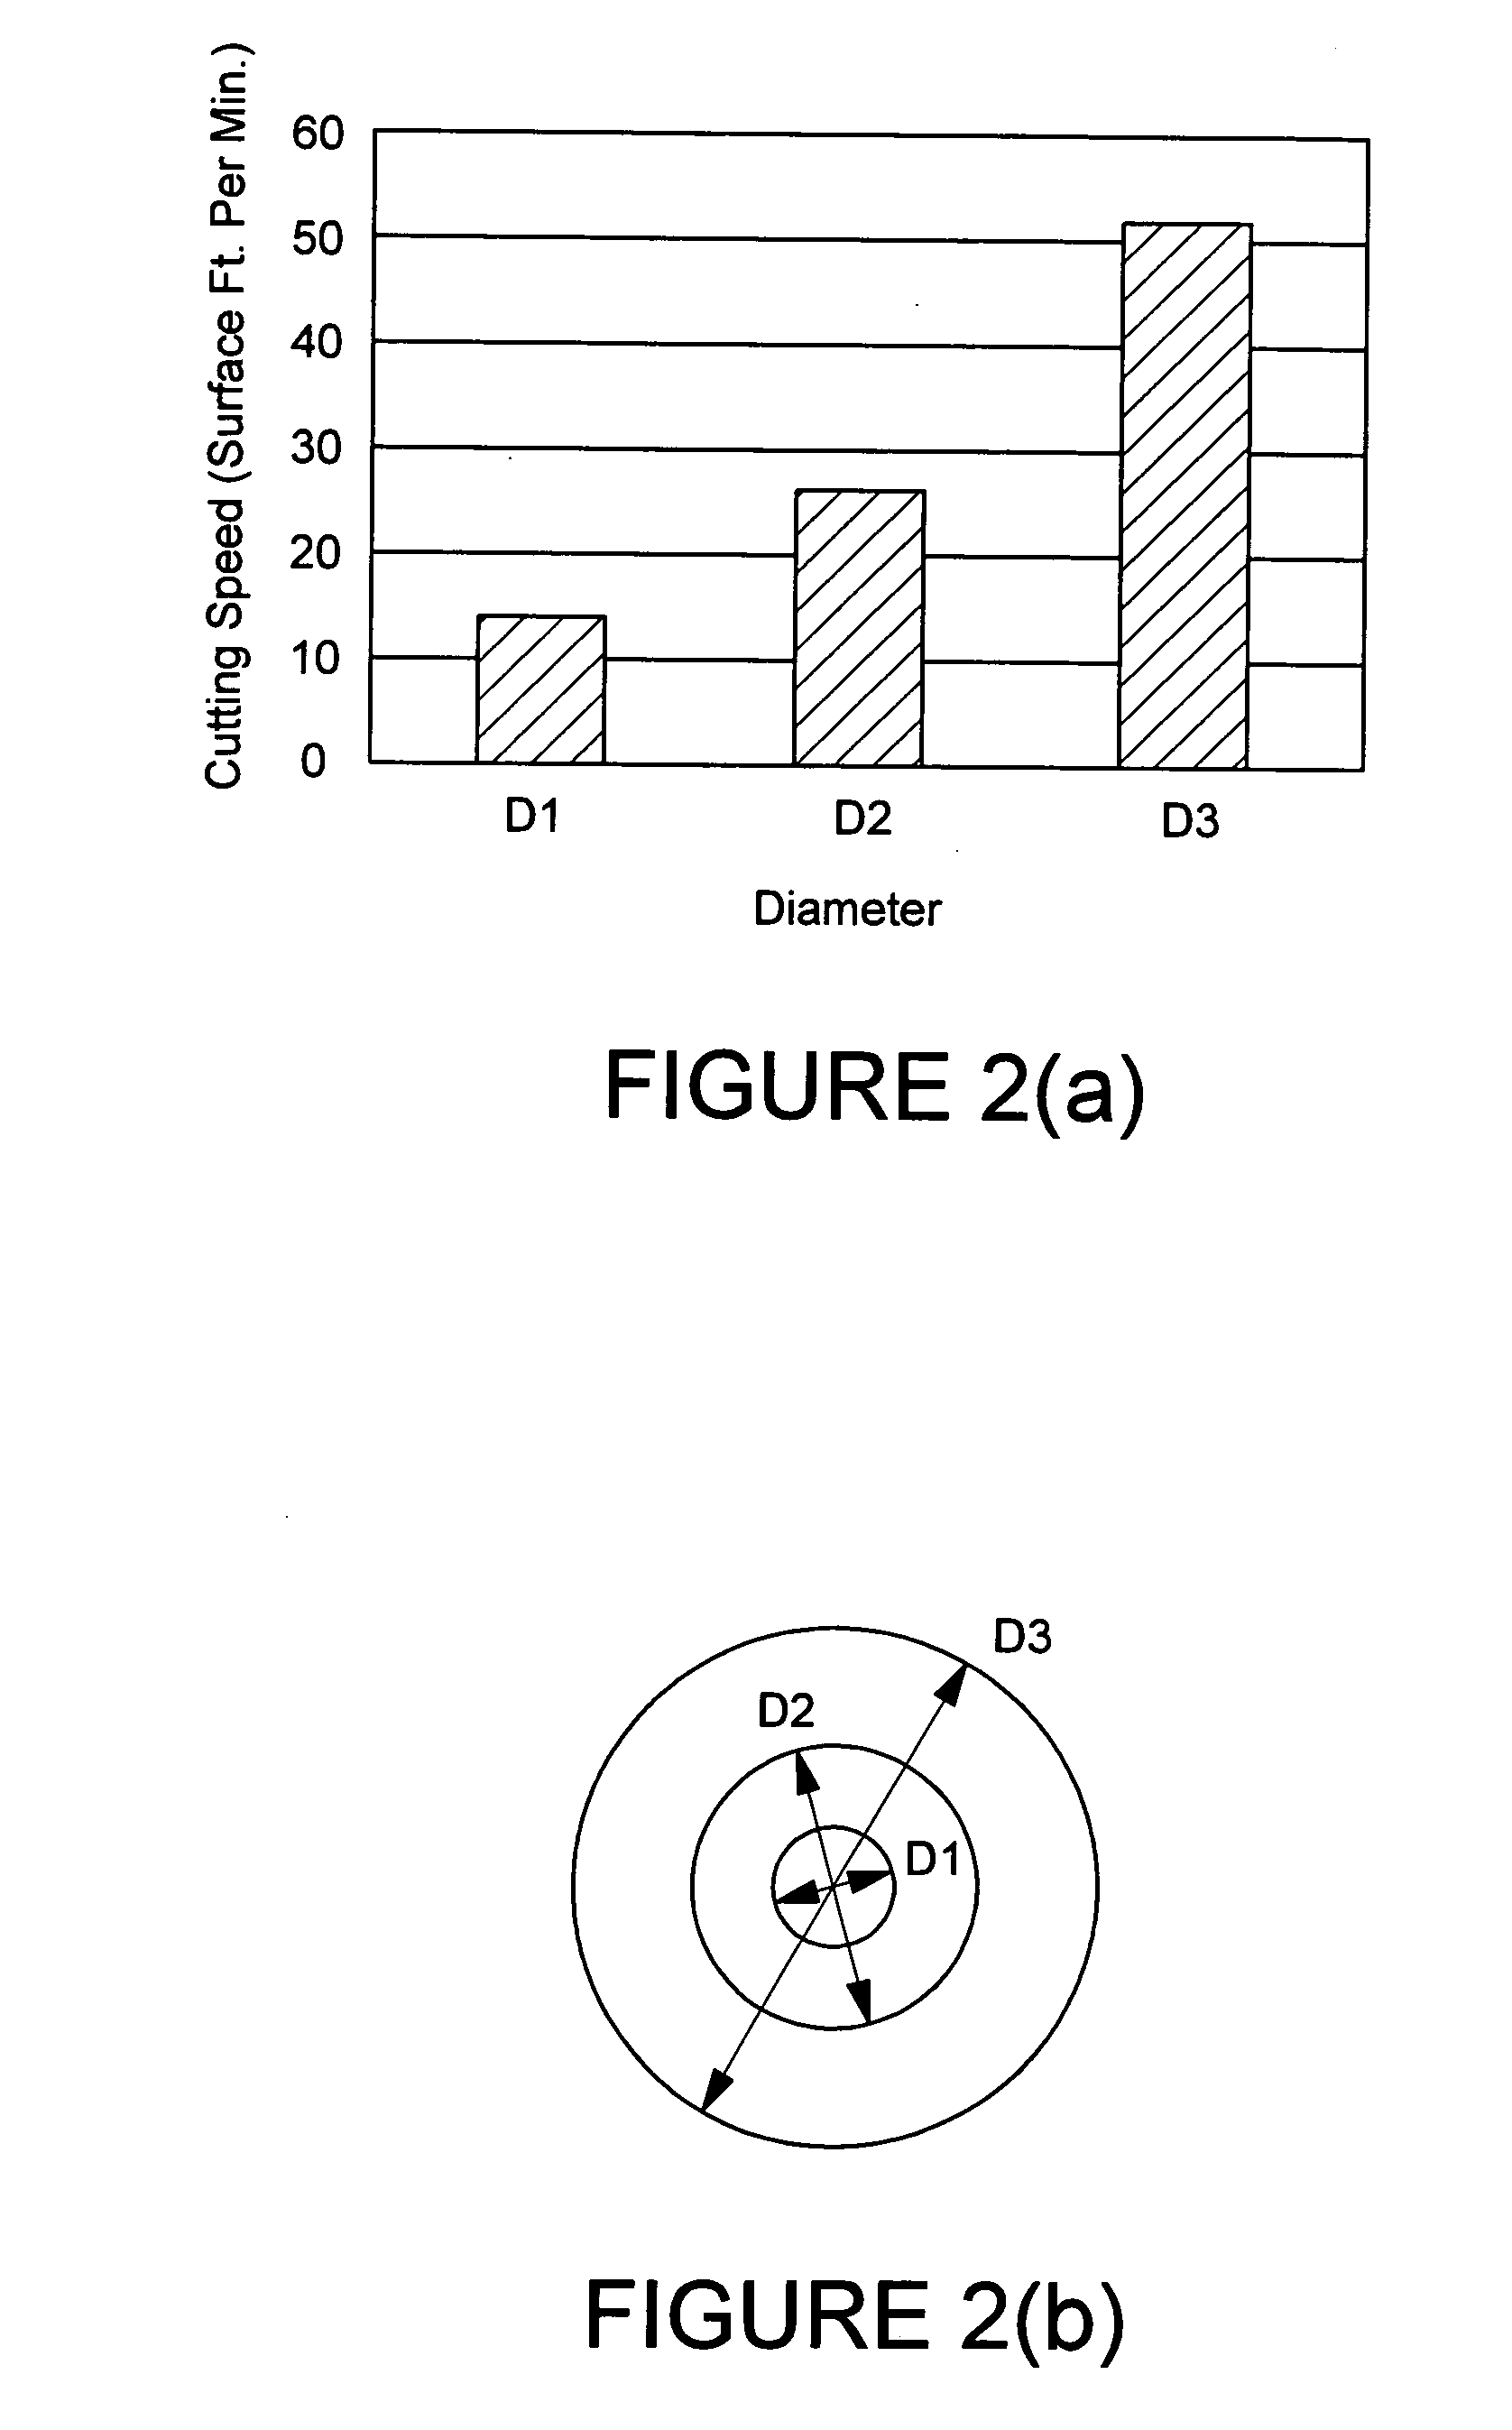 Composite article with coolant channels and tool fabrication method